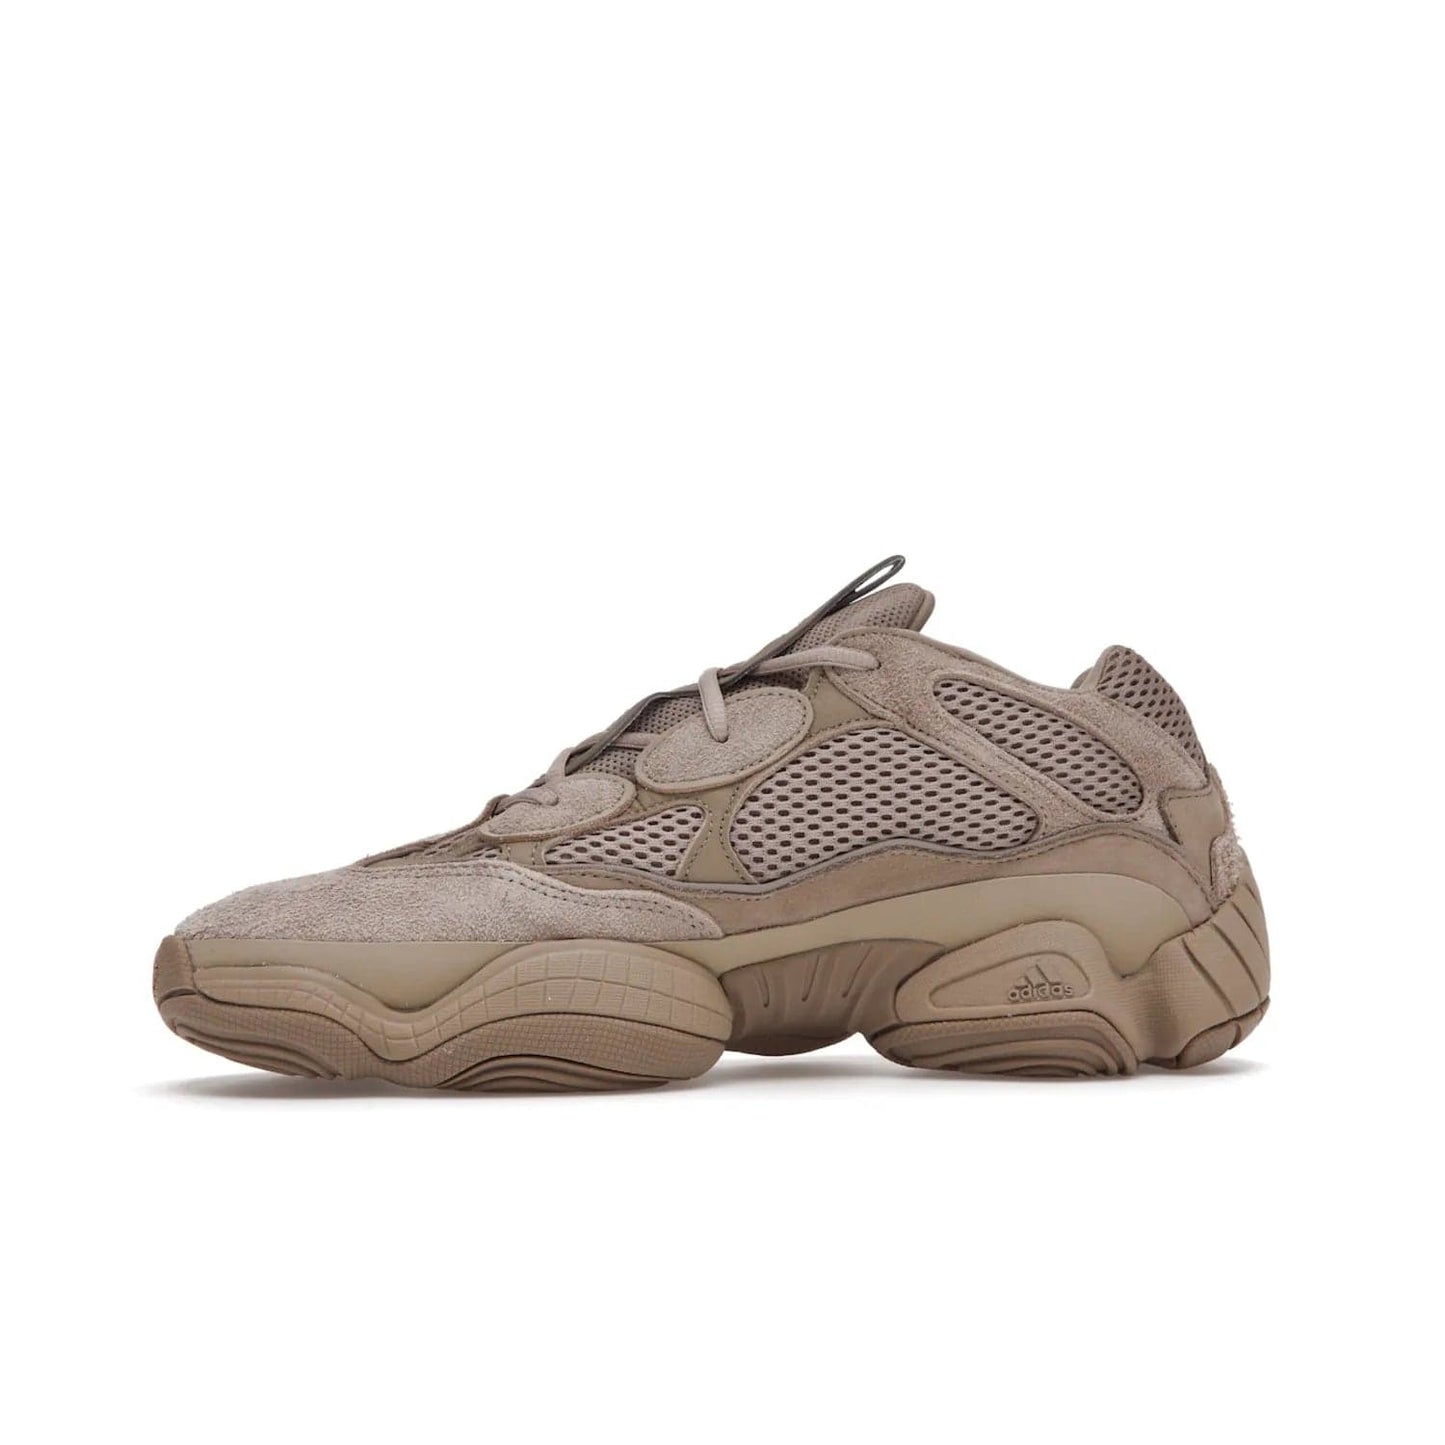 adidas Yeezy 500 Taupe Light - Image 18 - Only at www.BallersClubKickz.com - The adidas Yeezy 500 Taupe Light combines mesh, leather, and suede, with a durable adiPRENE sole for an eye-catching accessory. Reflective piping adds the perfect finishing touches to this unique silhouette. Ideal for any wardrobe, releasing in June 2021.